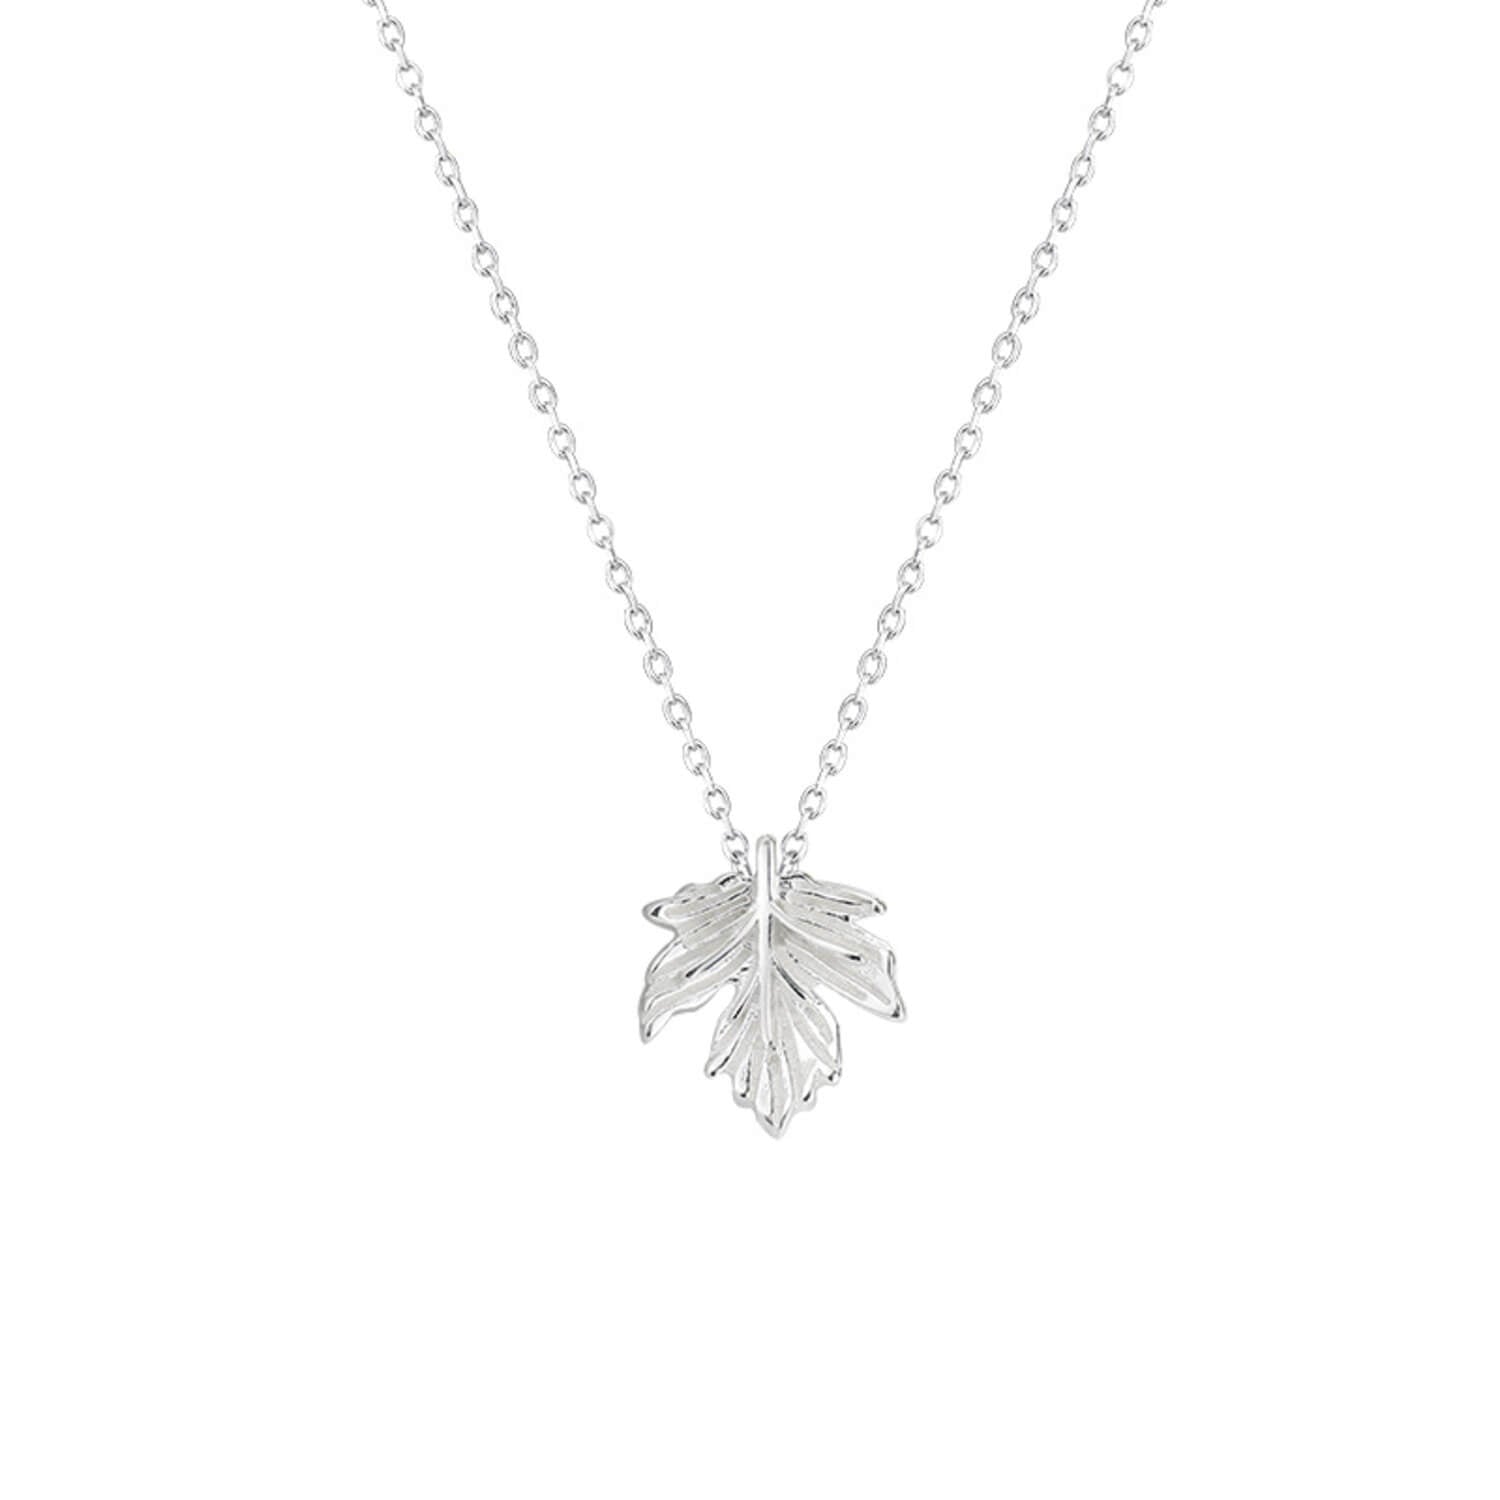 maple leaf necklace